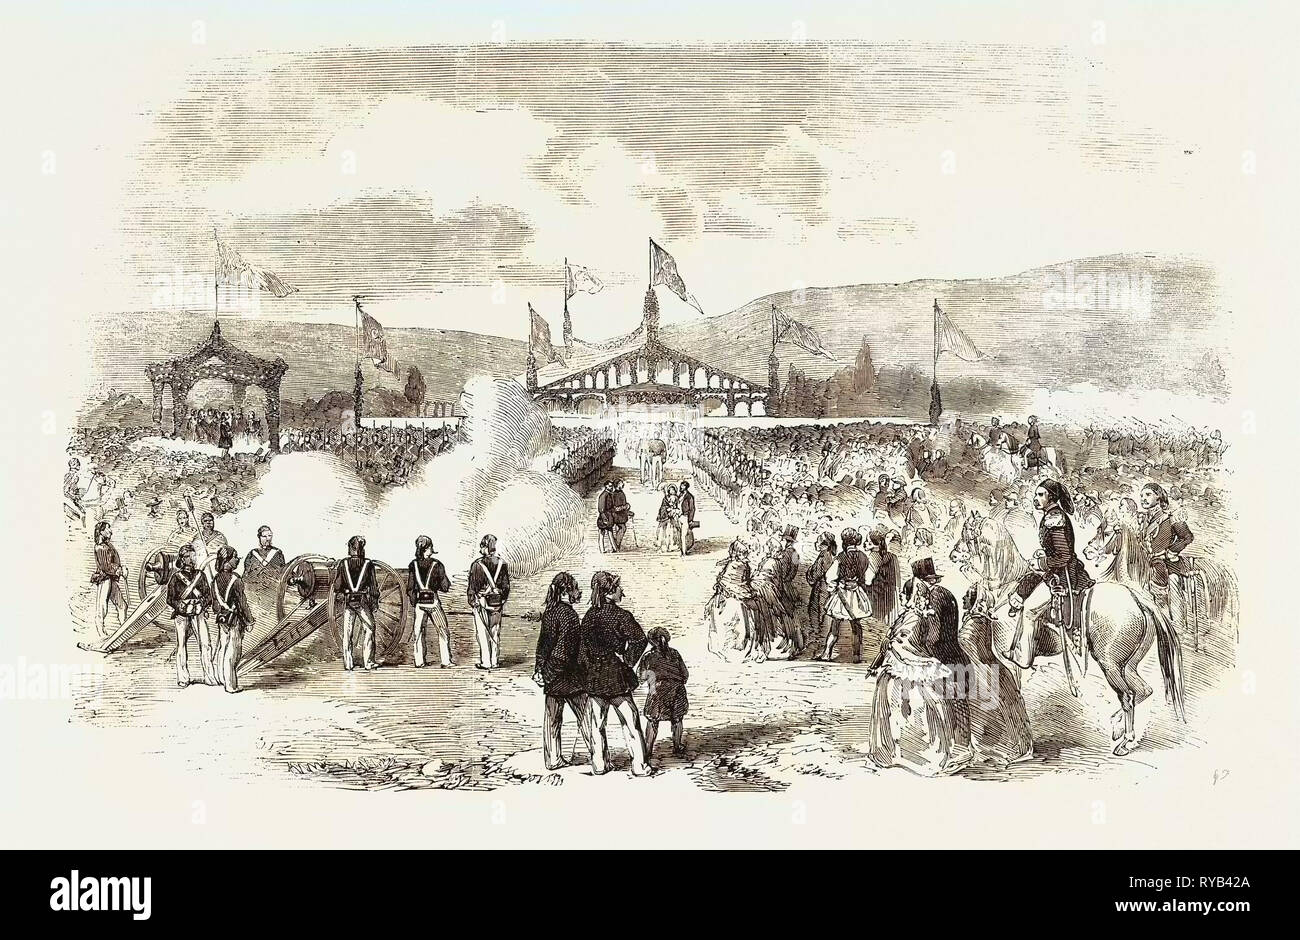 Commencement of the Smyrna and Aïdin Railway Turkey 1854 Stock Photo